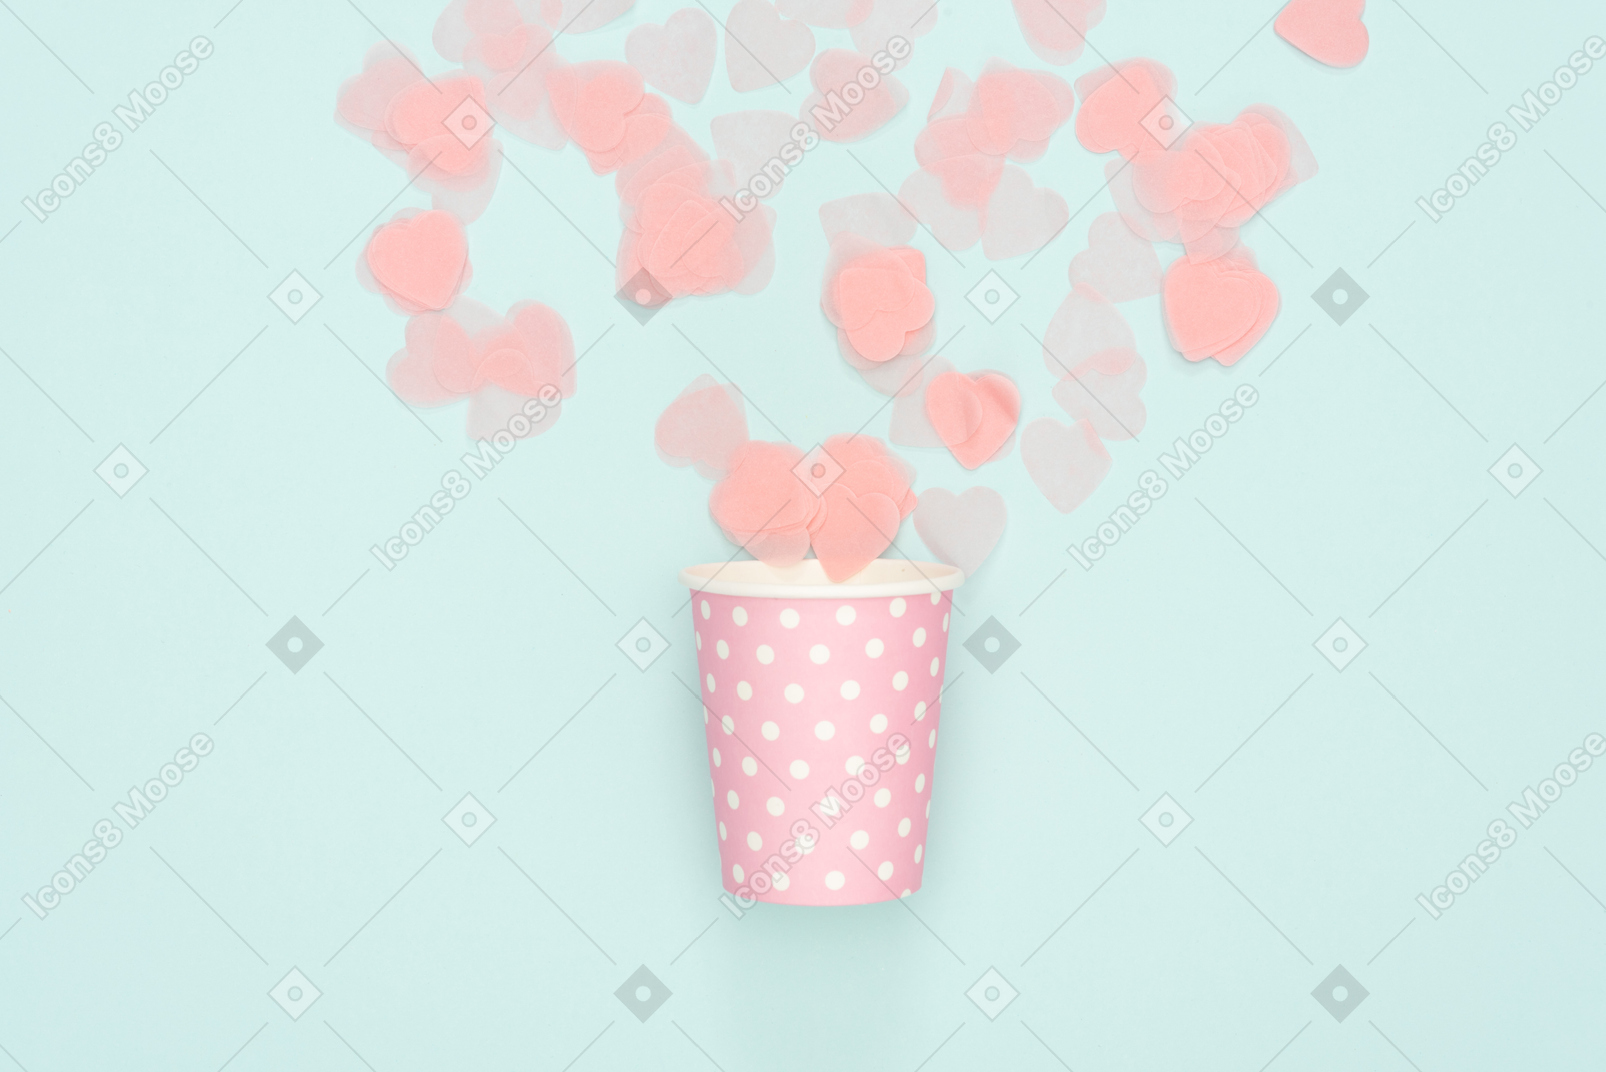 Confetti scattered from polka dot pink paper cup